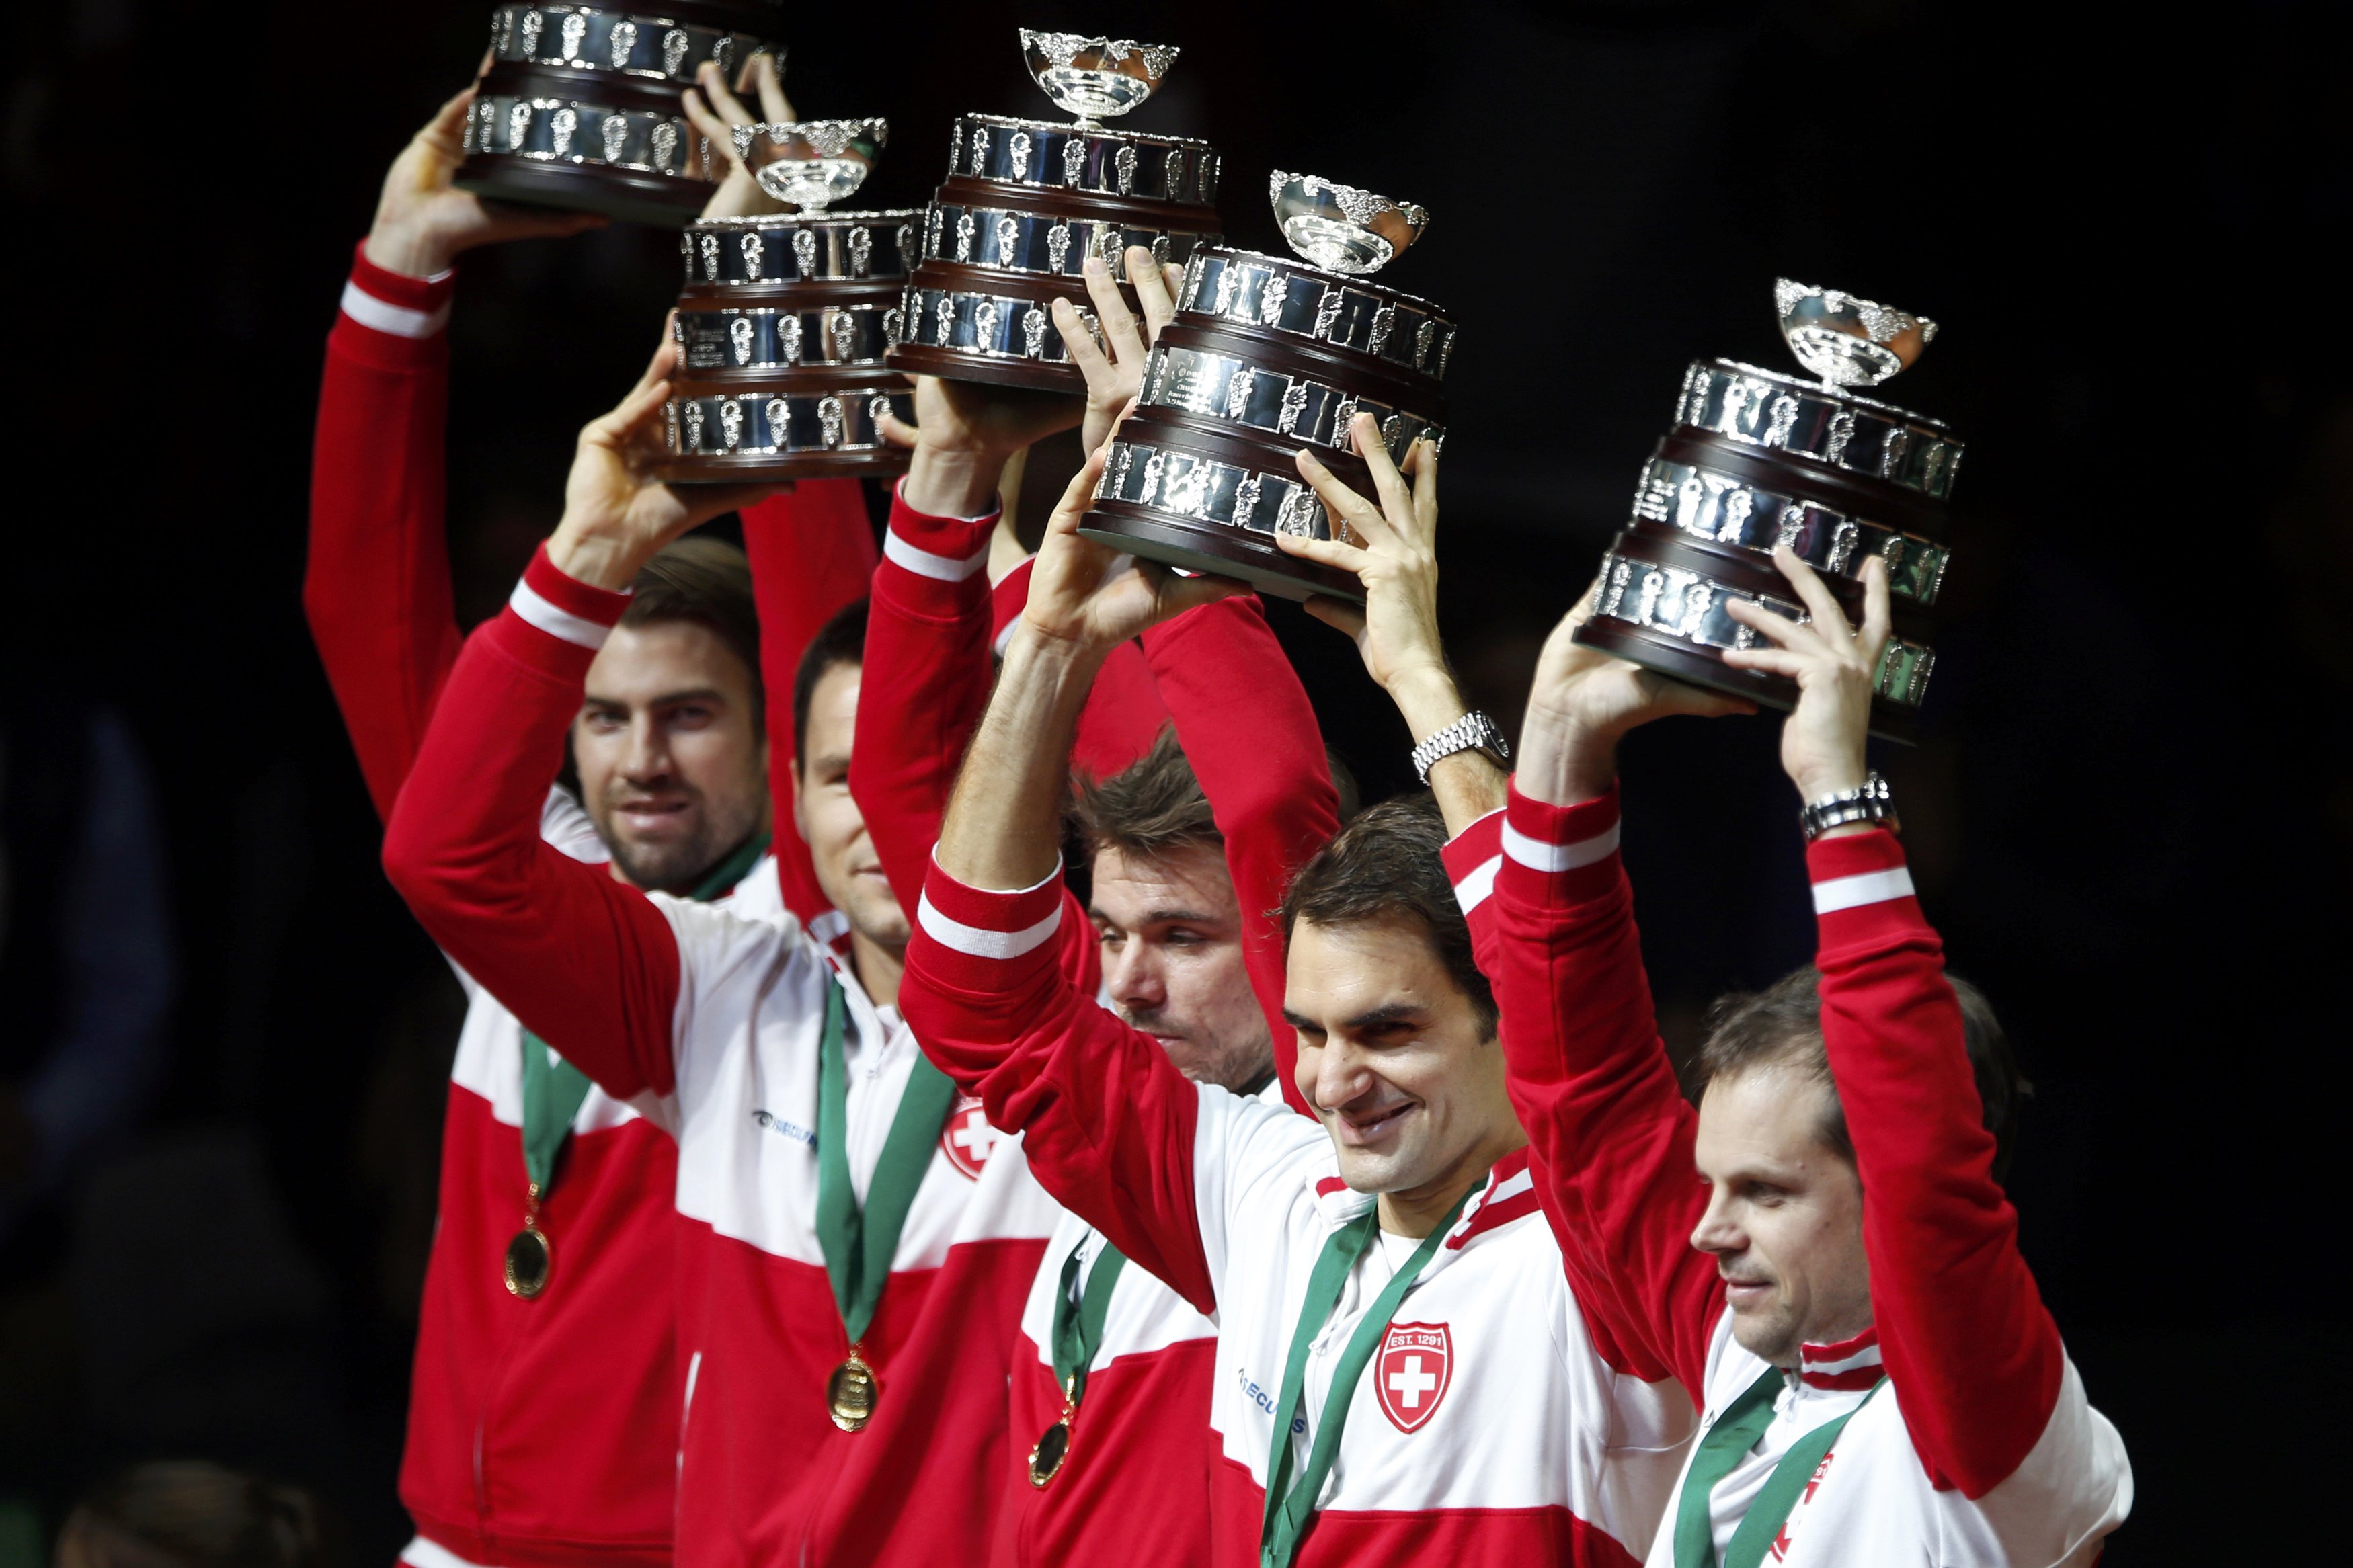 Switzerland's Roger Federer (2ndR) and tennis team captain Severin Luthi (R) raise their trophies as they stand with teammates after winning the Davis Cup final at the Pierre-Mauroy stadium in Villeneuve d'Ascq, near Lille, November 23, 2014. Roger Federer beat Richard Gasquet on Sunday to give Switzerland their first Davis Cup title with a 3-1 victory over hosts France in the final. REUTERS/Charles Platiau (FRANCE - Tags: SPORT TENNIS)